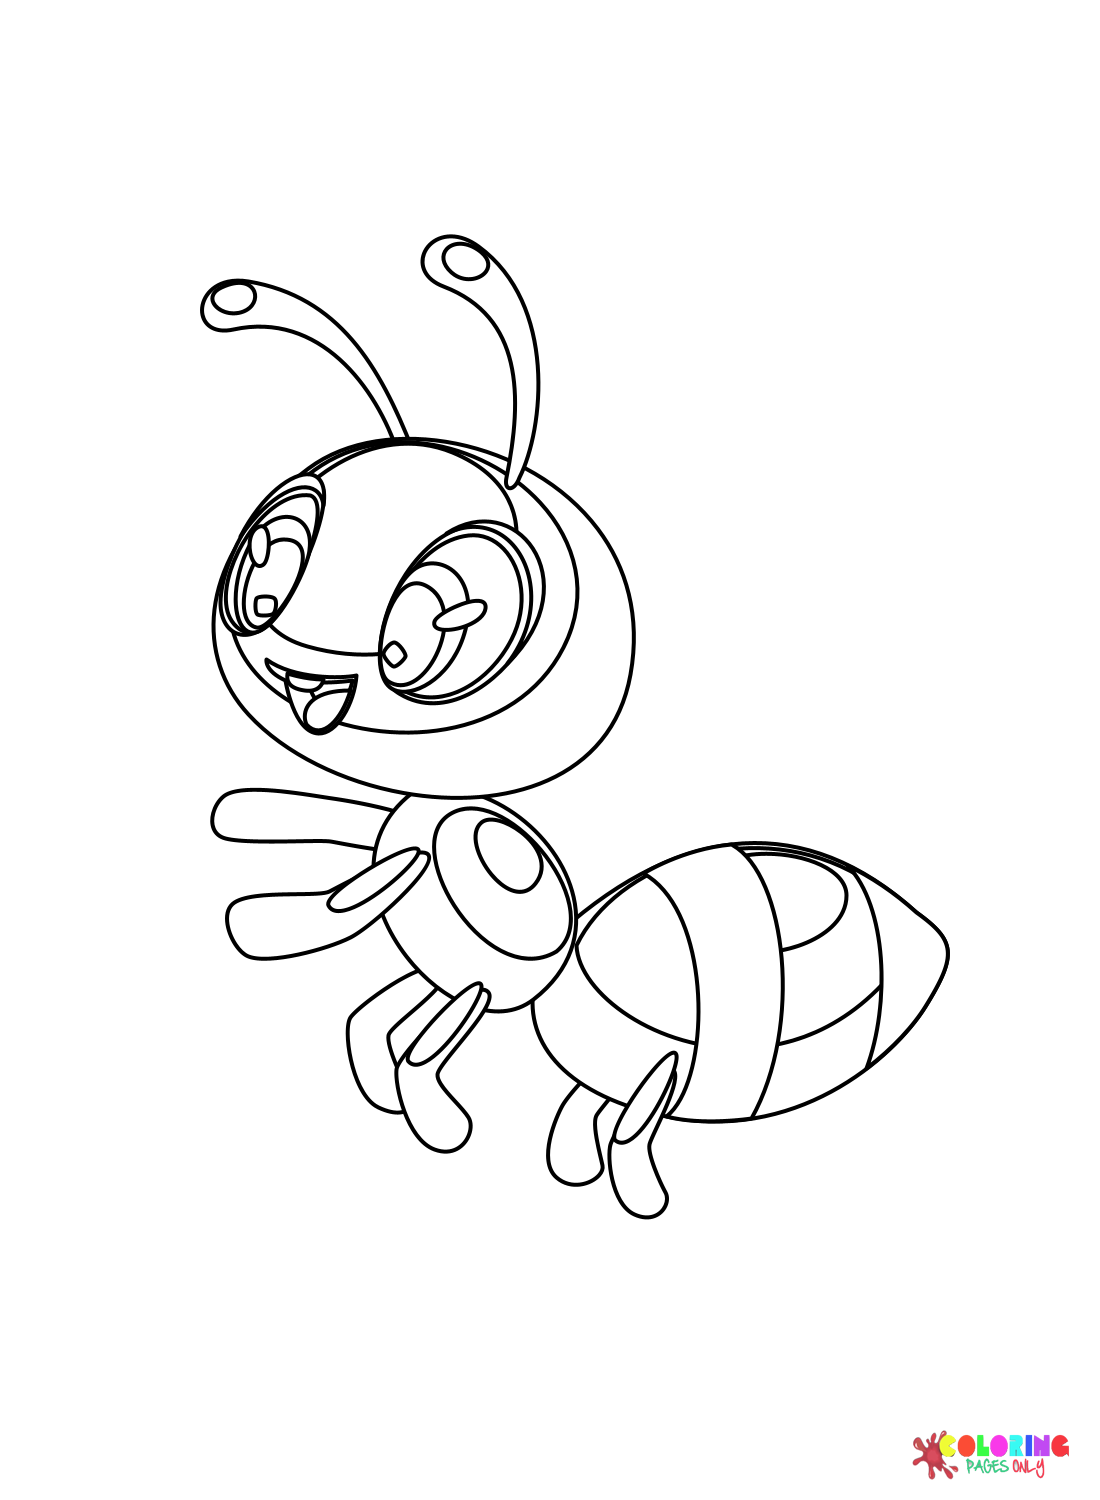 Ant Images Coloring Page